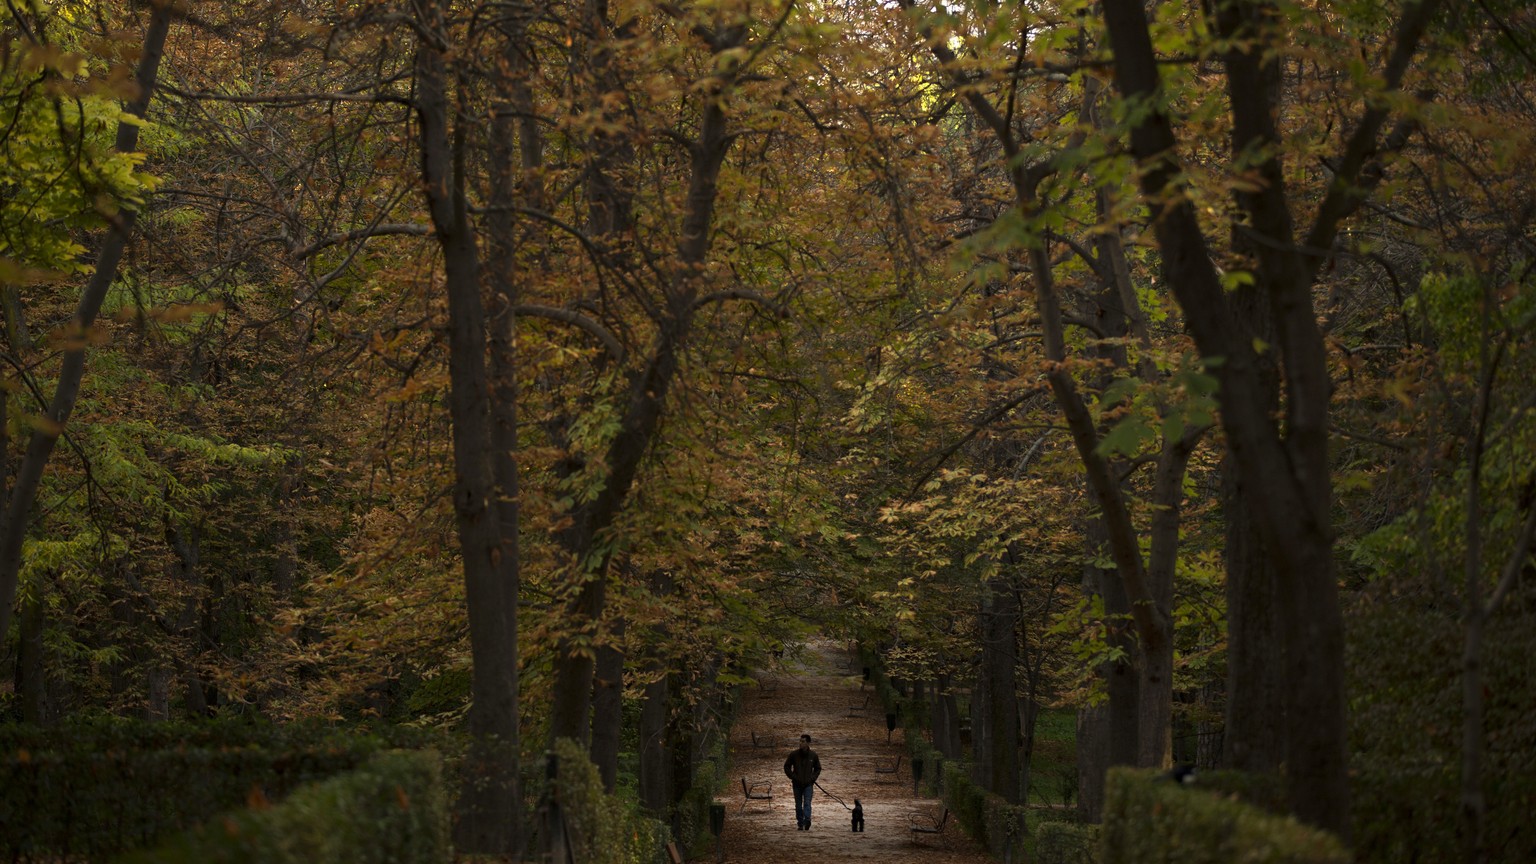 A man strolls with a dog along a path at the Retiro park during an autumn evening in Madrid, Wednesday, Nov. 8, 2017. (AP Photo/Francisco Seco)